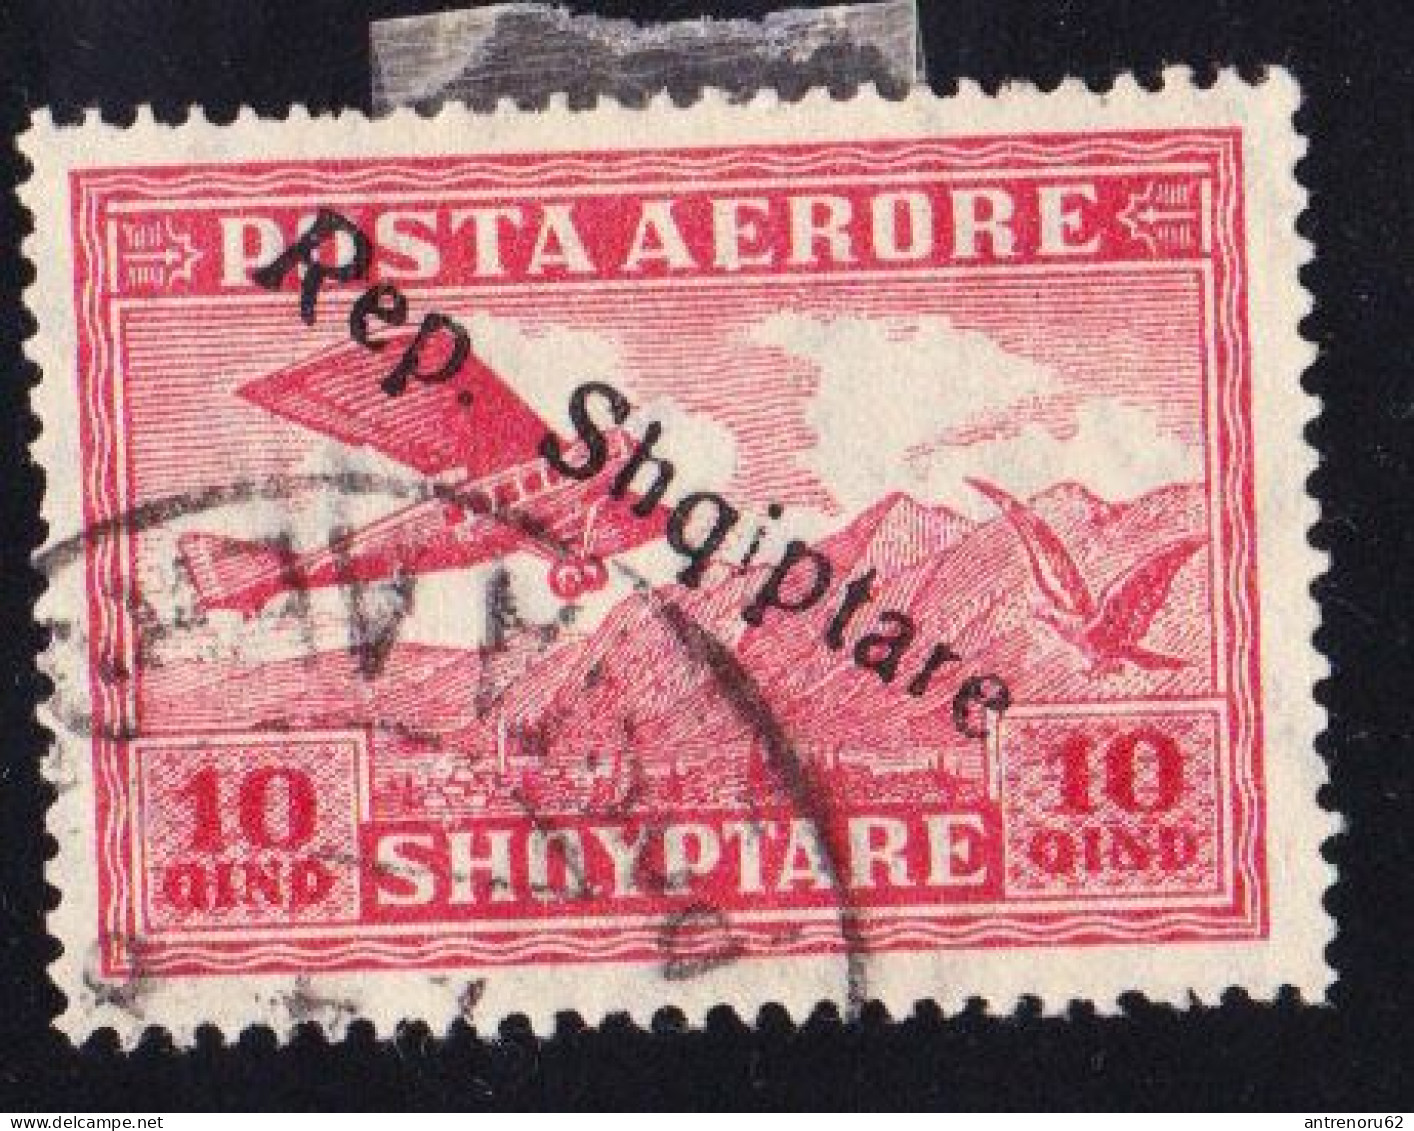 STAMPS-ALBANIA-1927-USED-SEE-SCAN - Albanien